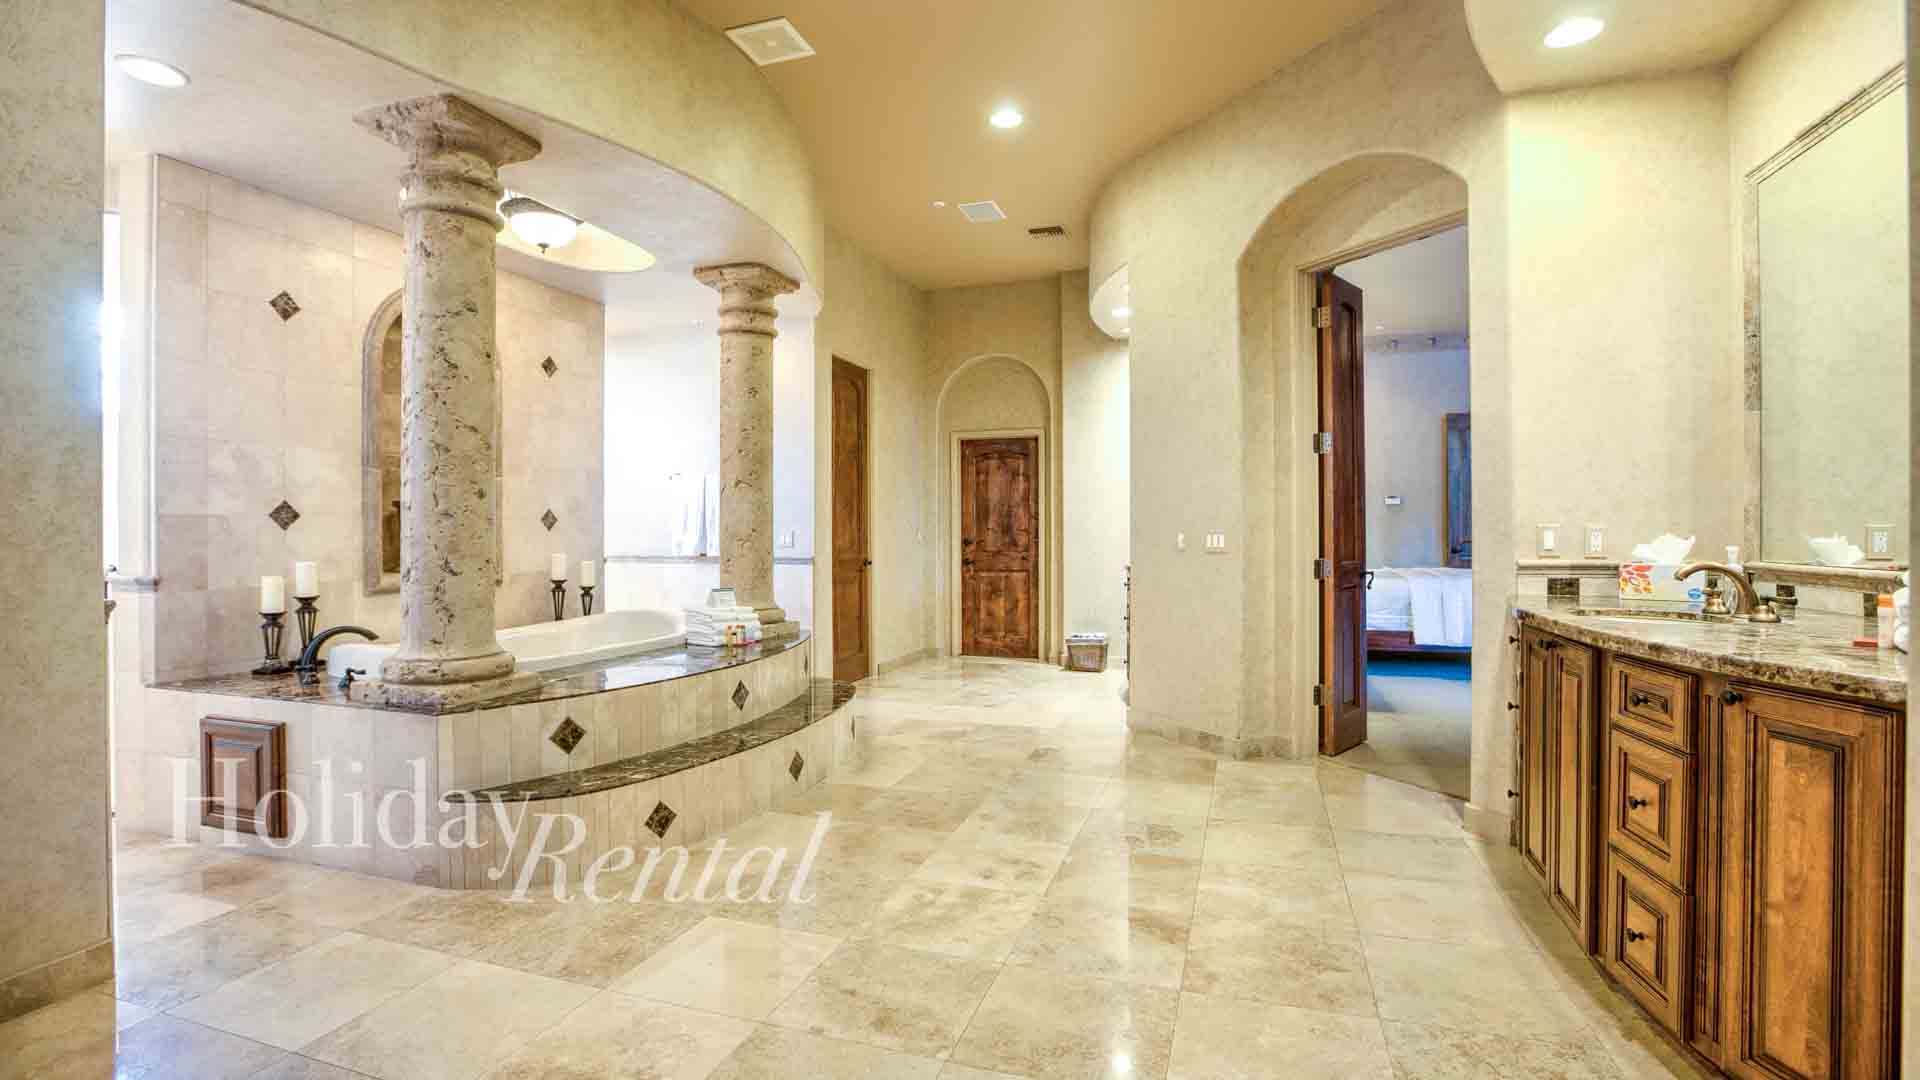 Luxurious Primary bathroom with soaking tub